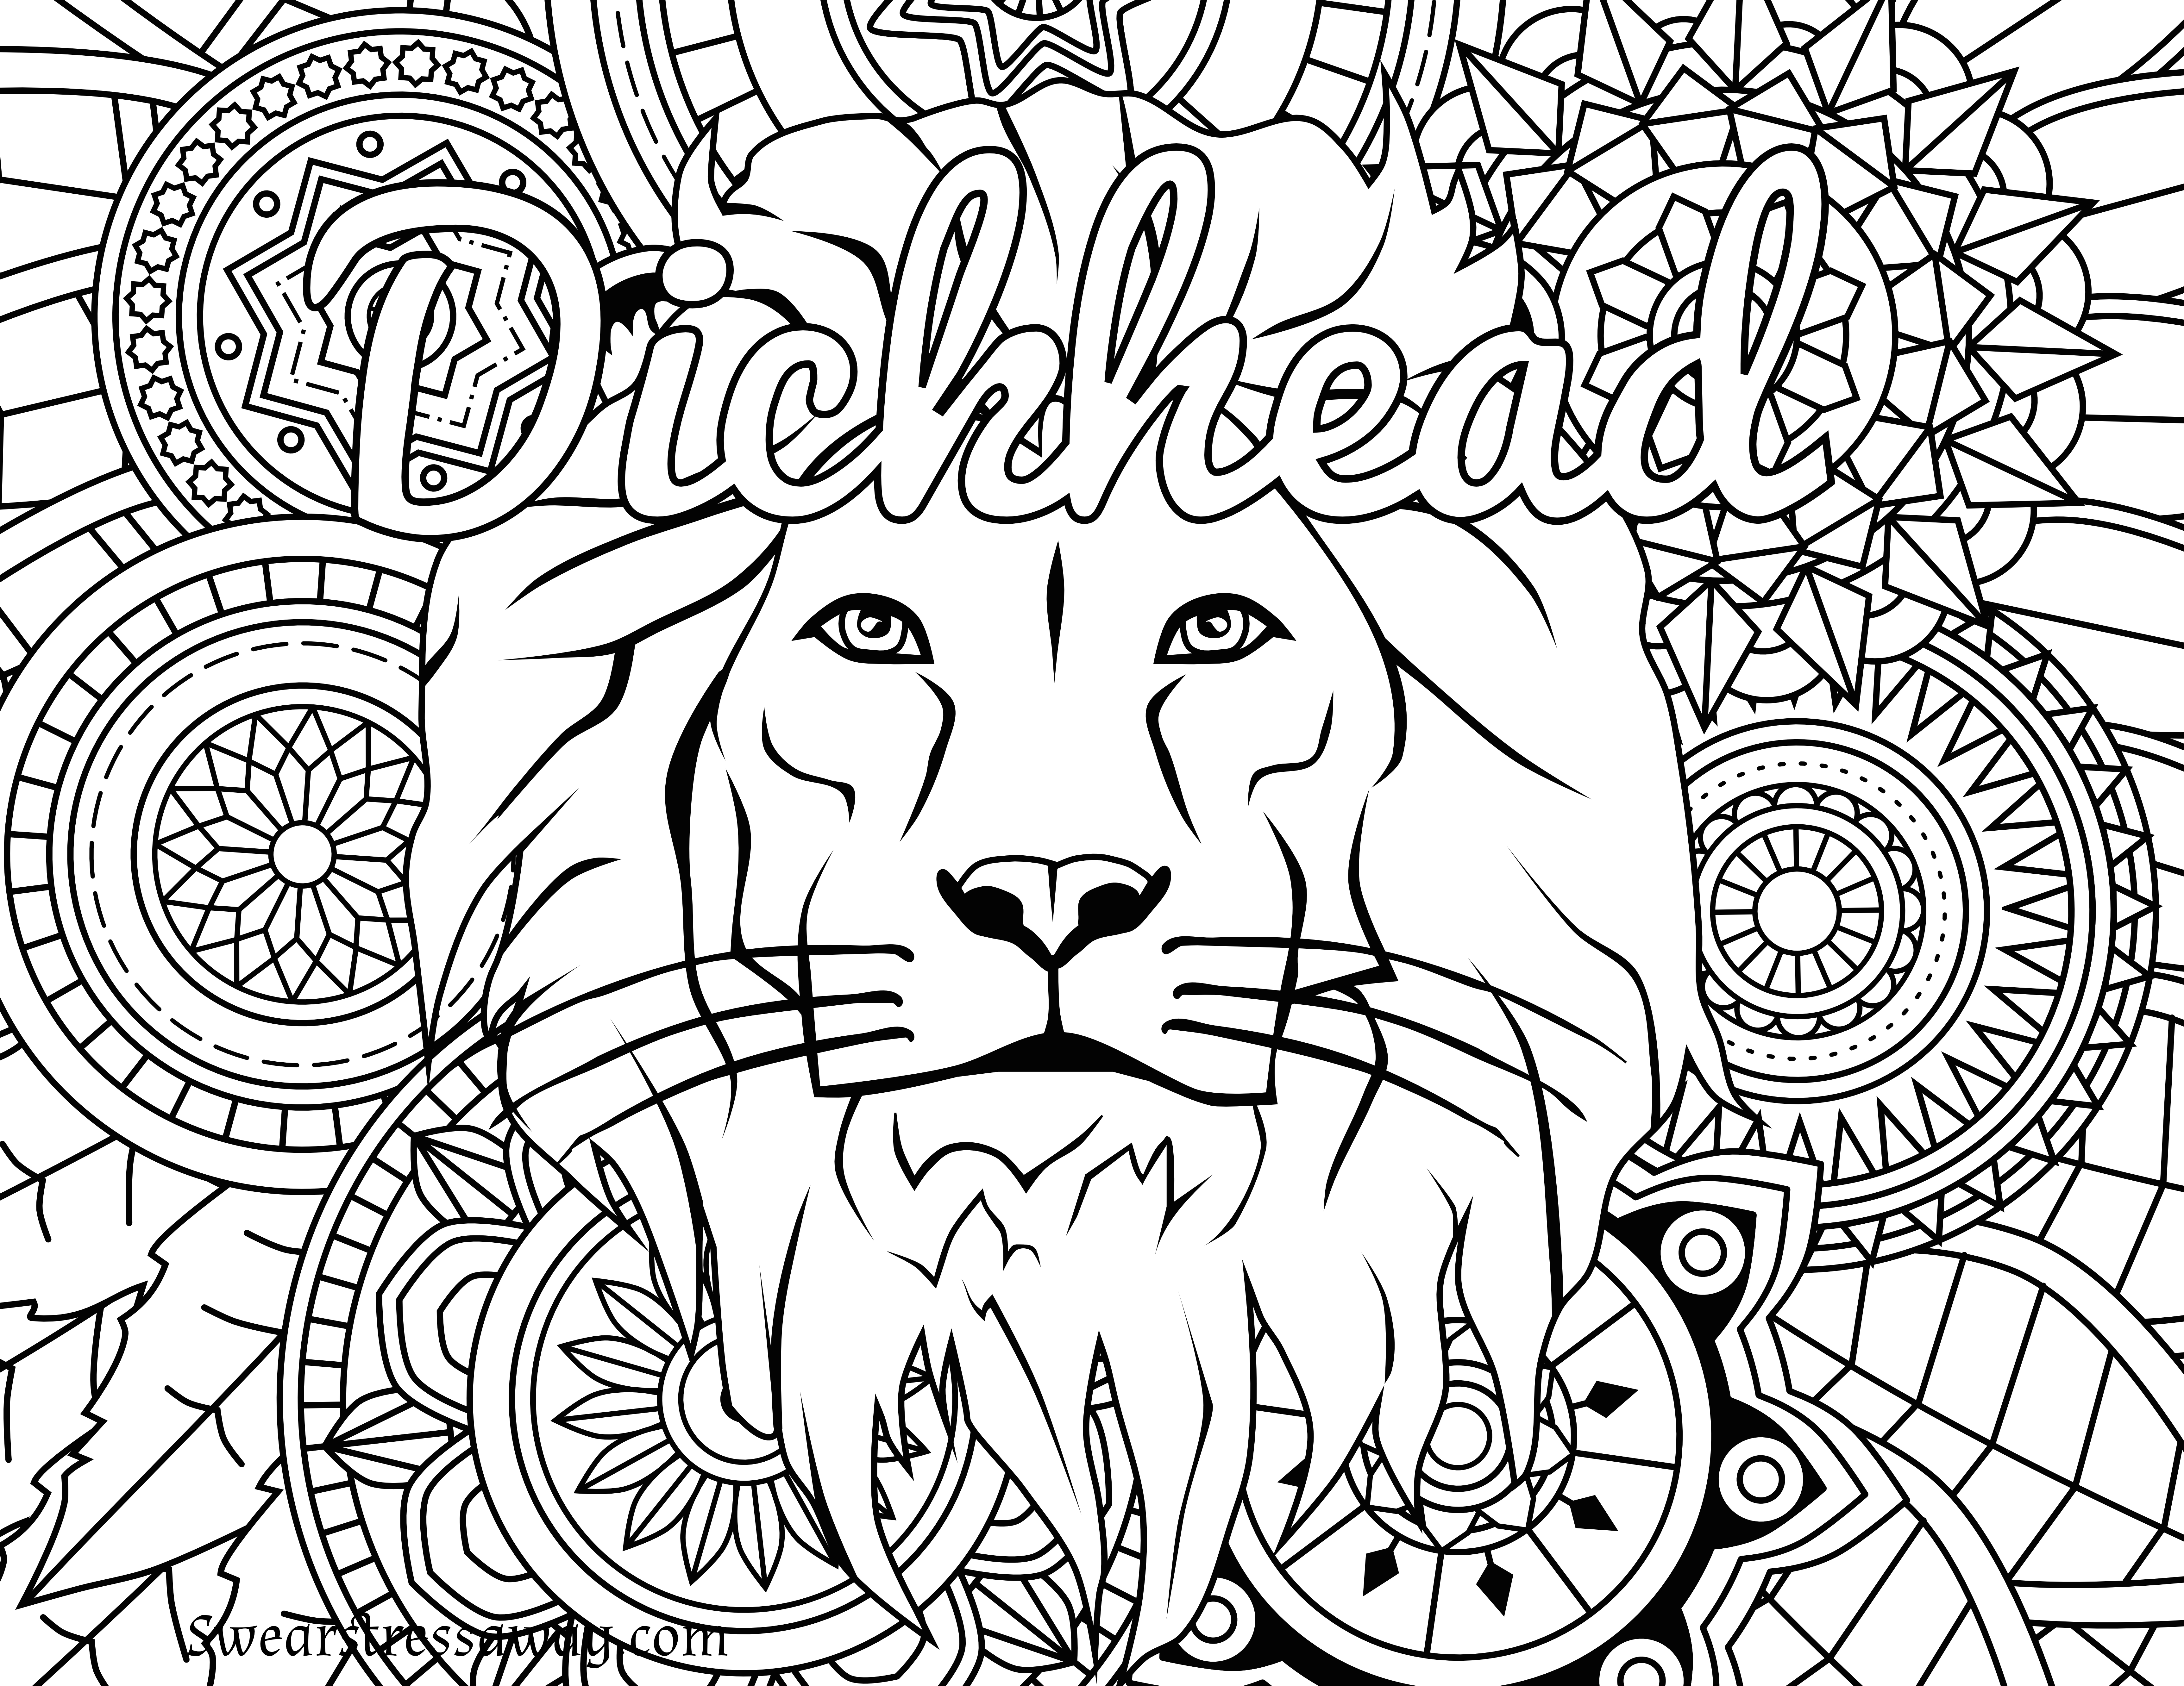 curse-word-coloring-pages-free-printable-at-getdrawings-free-download